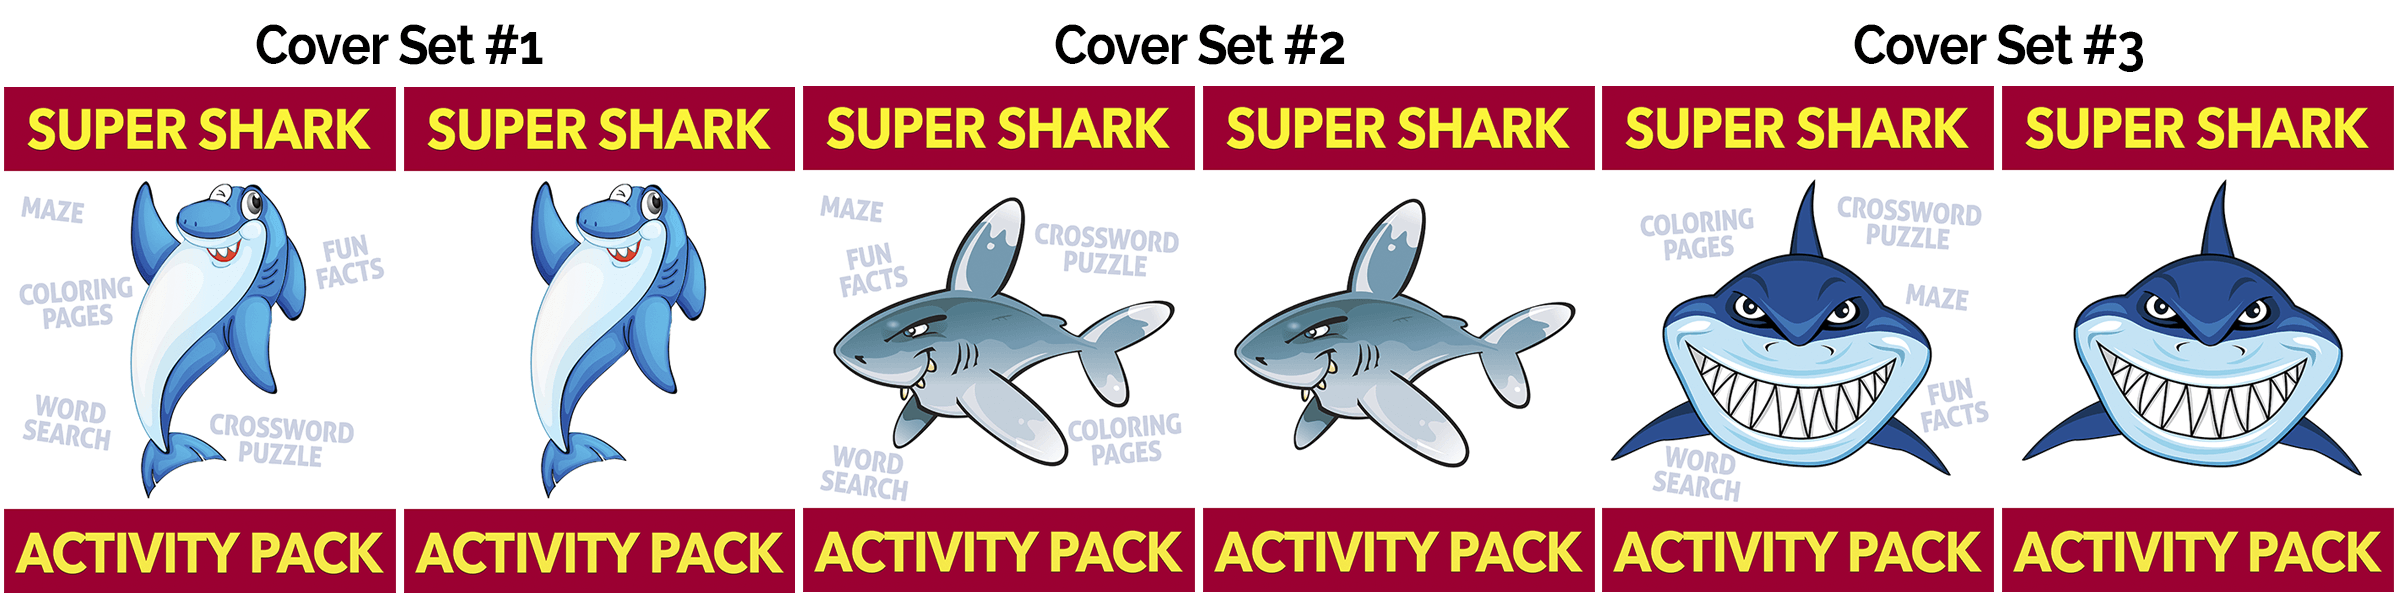 Super Shark Pack Covers